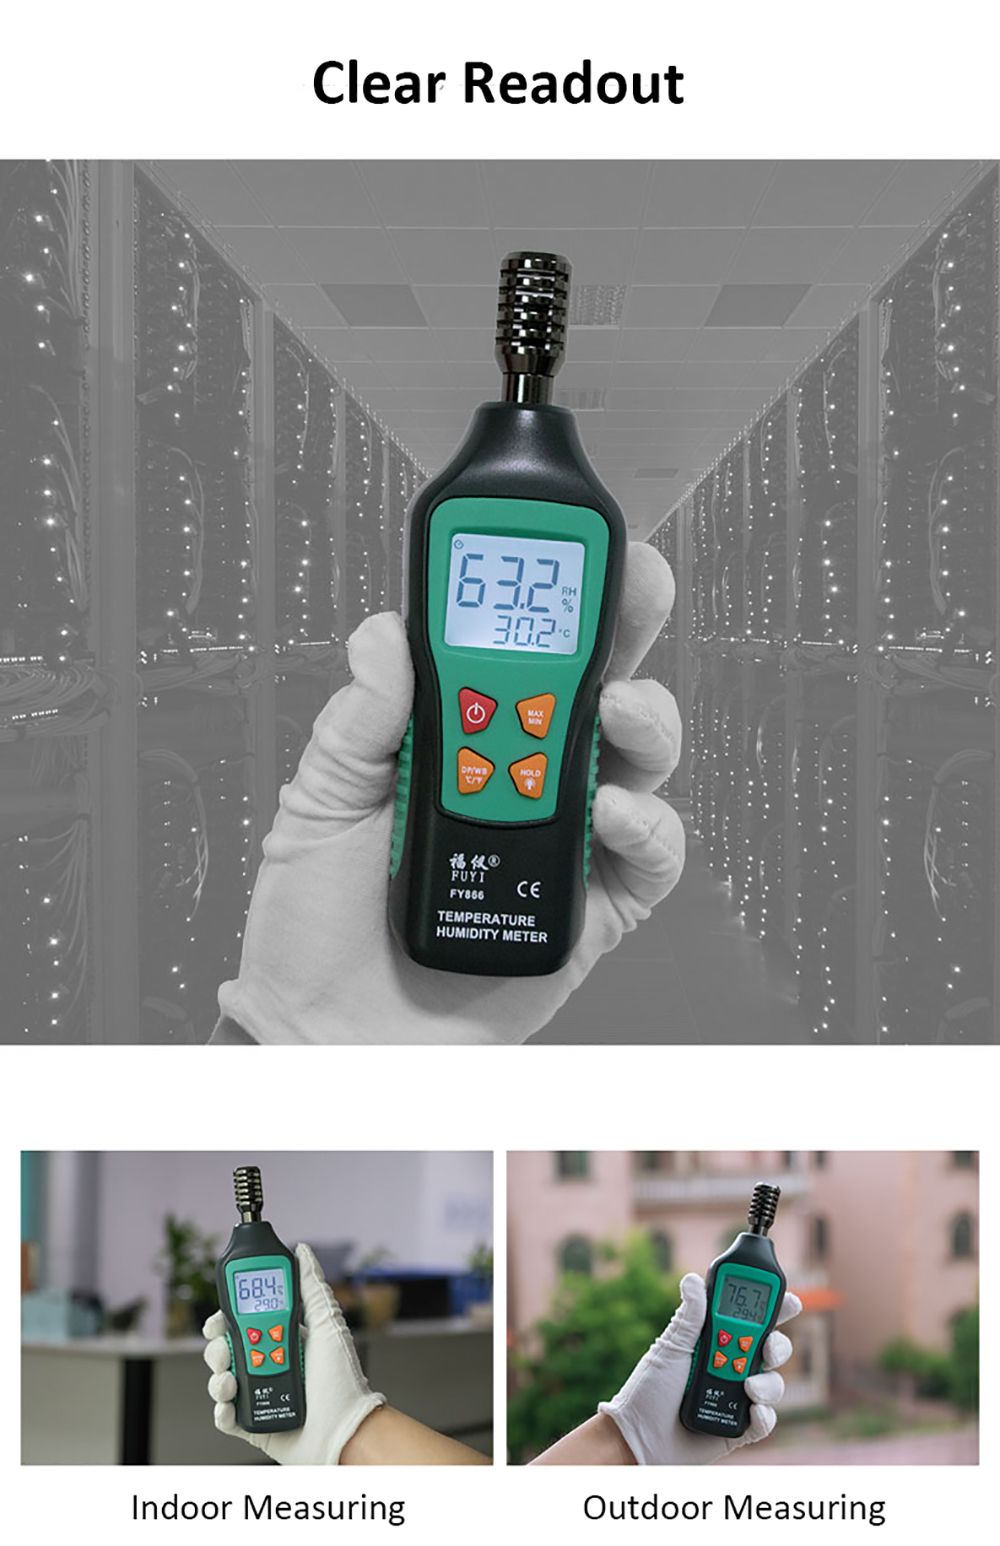 FUYI-FY866-Digital-Thermometer-Hygrometer-Mini-Weather-Station-Wet-Bulb-Dew-Point-Temperature-Meter--1584795